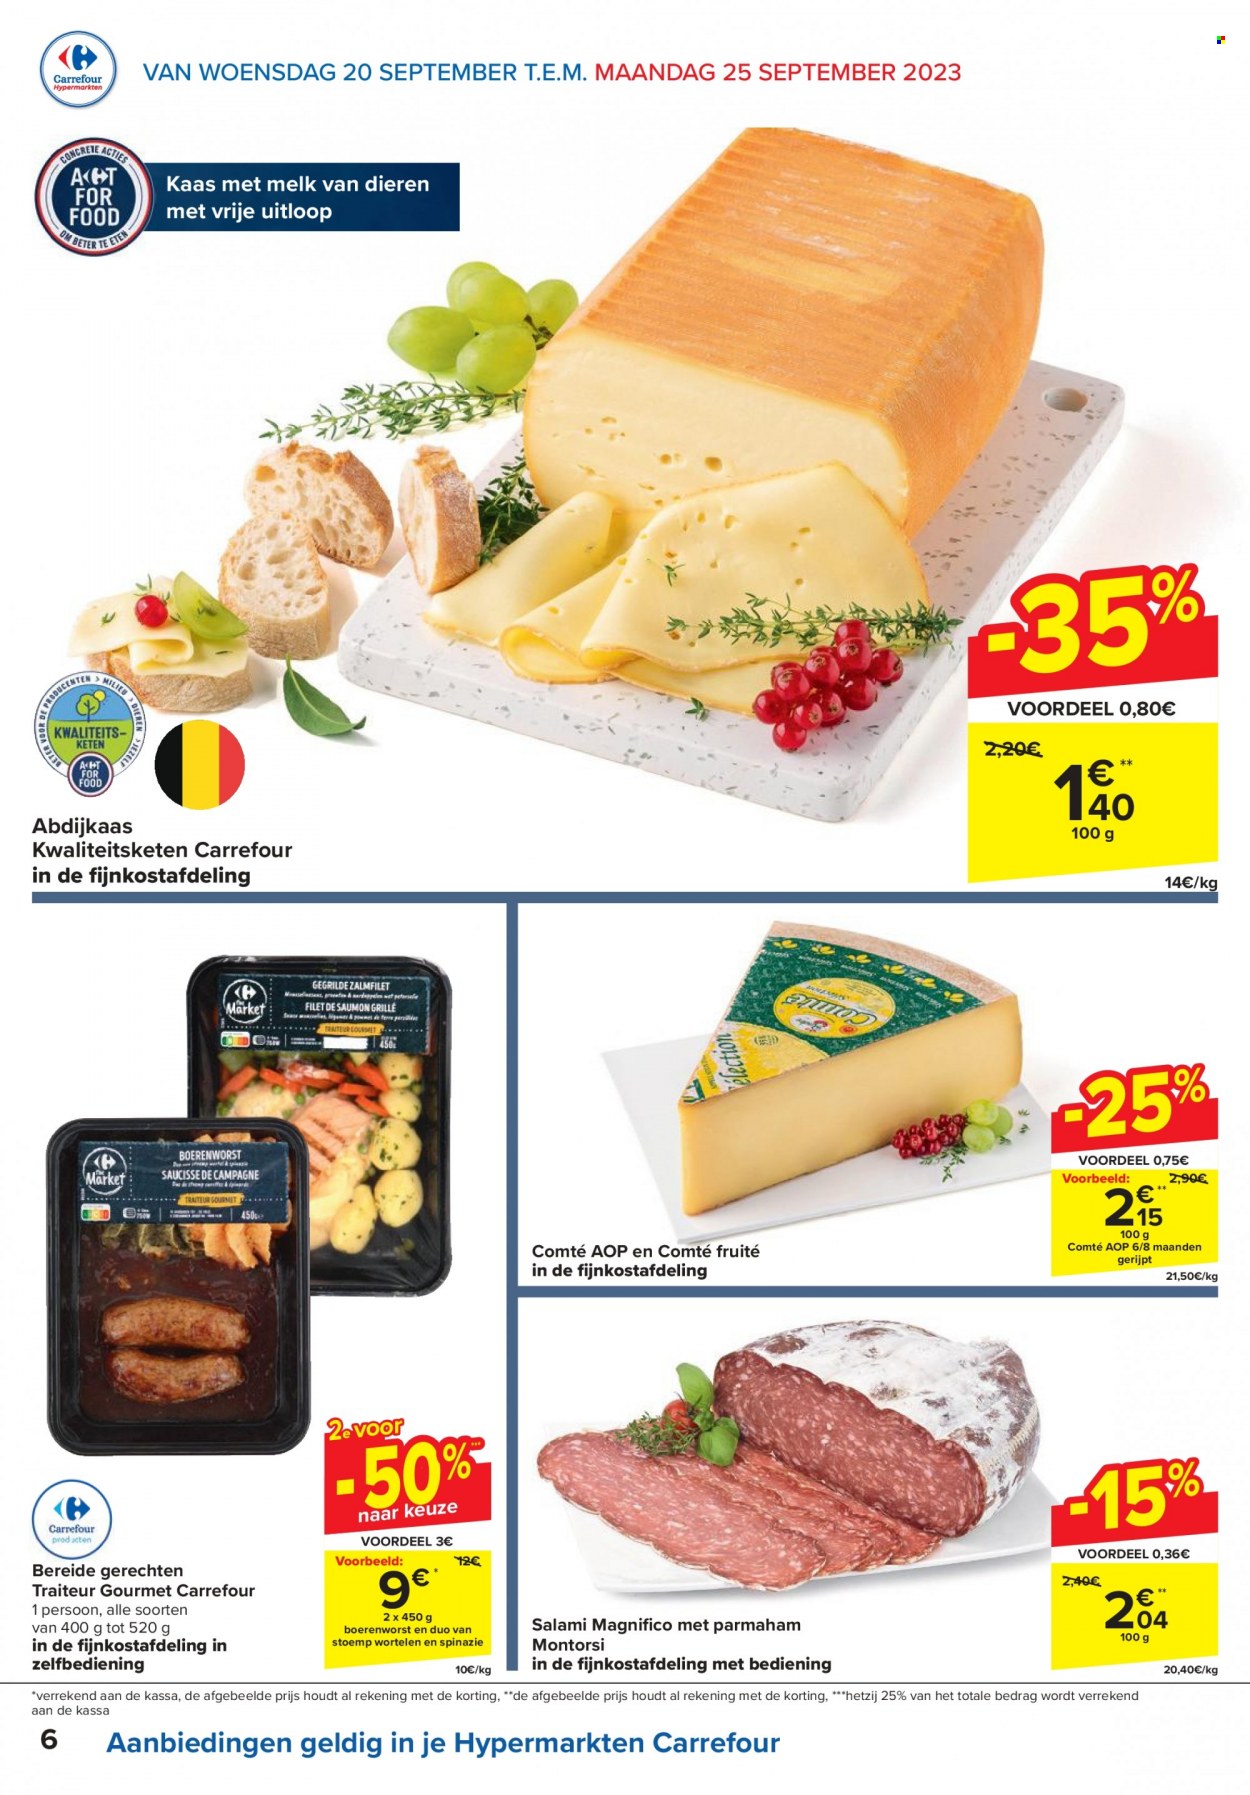 Catalogue Carrefour hypermarkt - 20.9.2023 - 2.10.2023. Page 6.